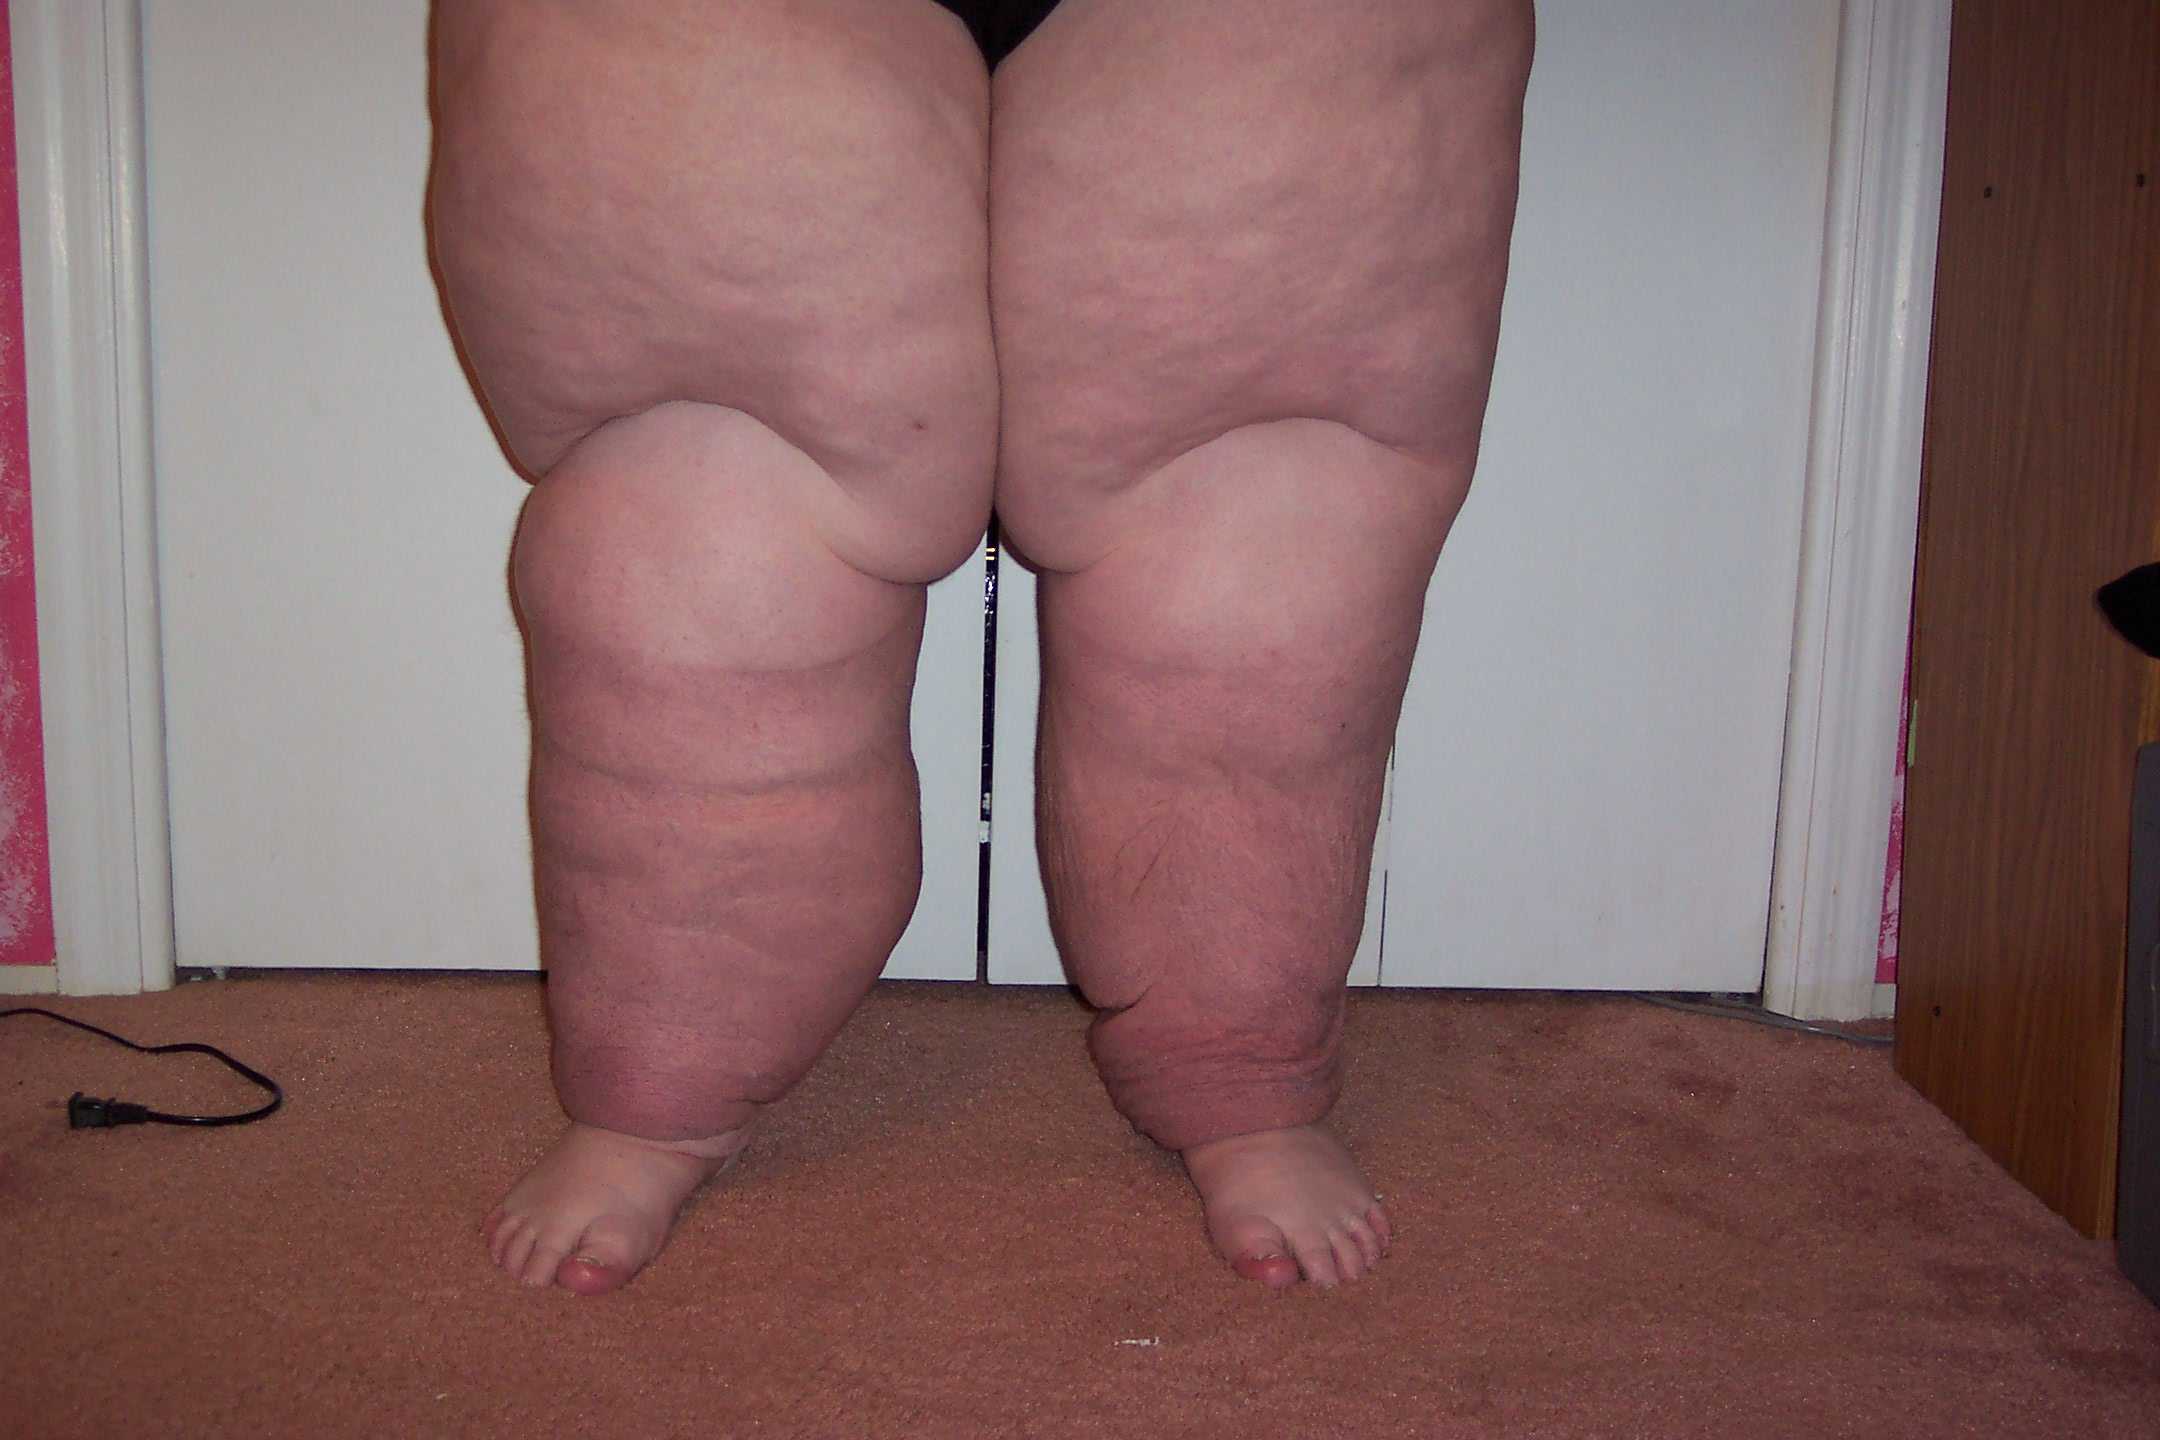 Stage 3 lymphedema front view after treatments, 65 pounds lost in 14 days